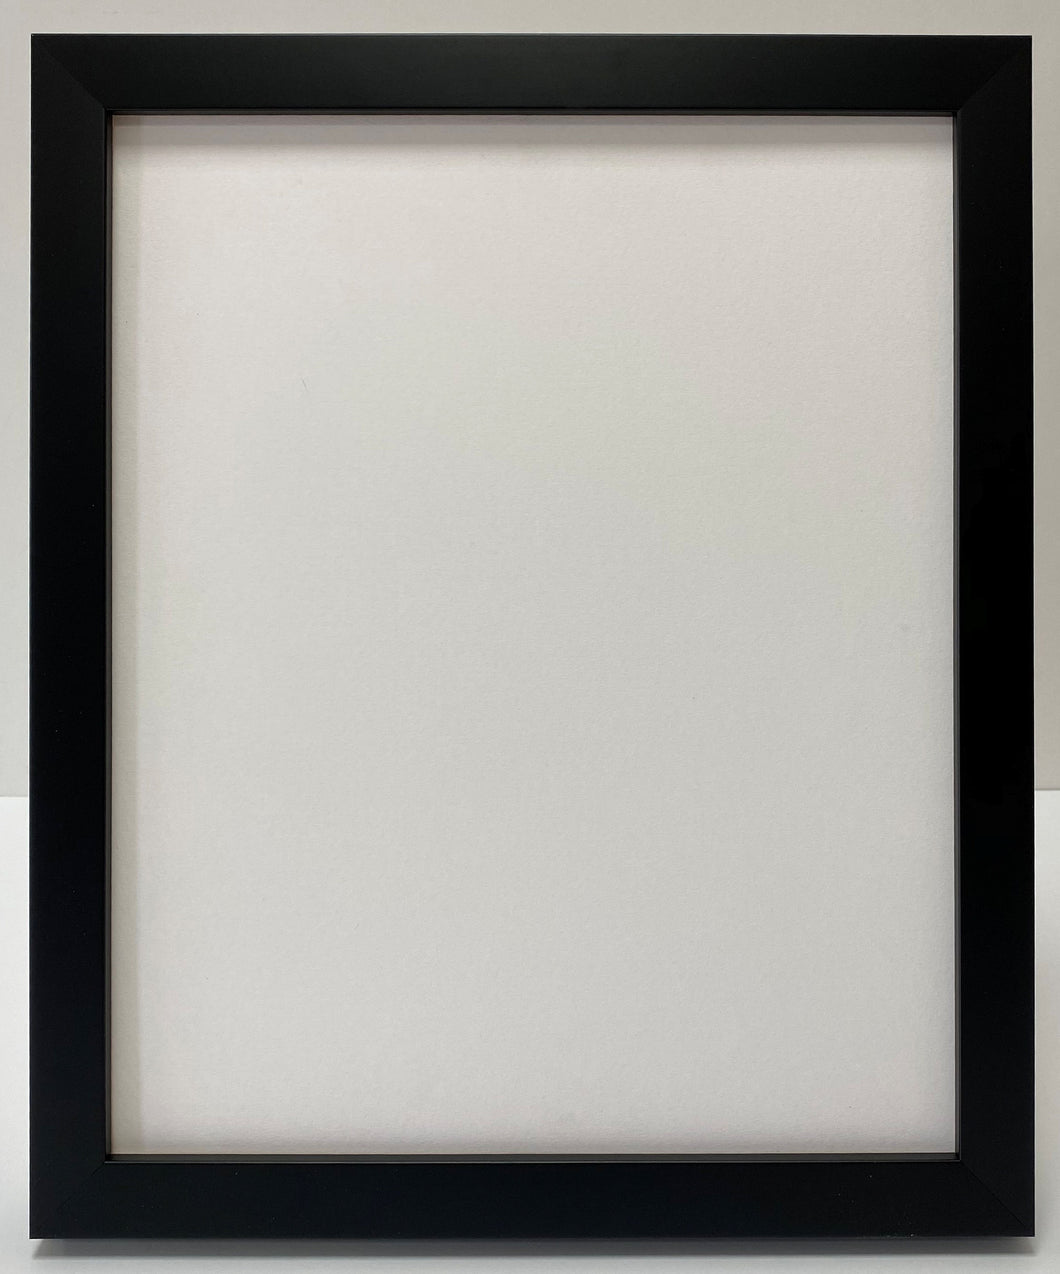 Deep Black Box Wooden Picture Frame (22mm wide)